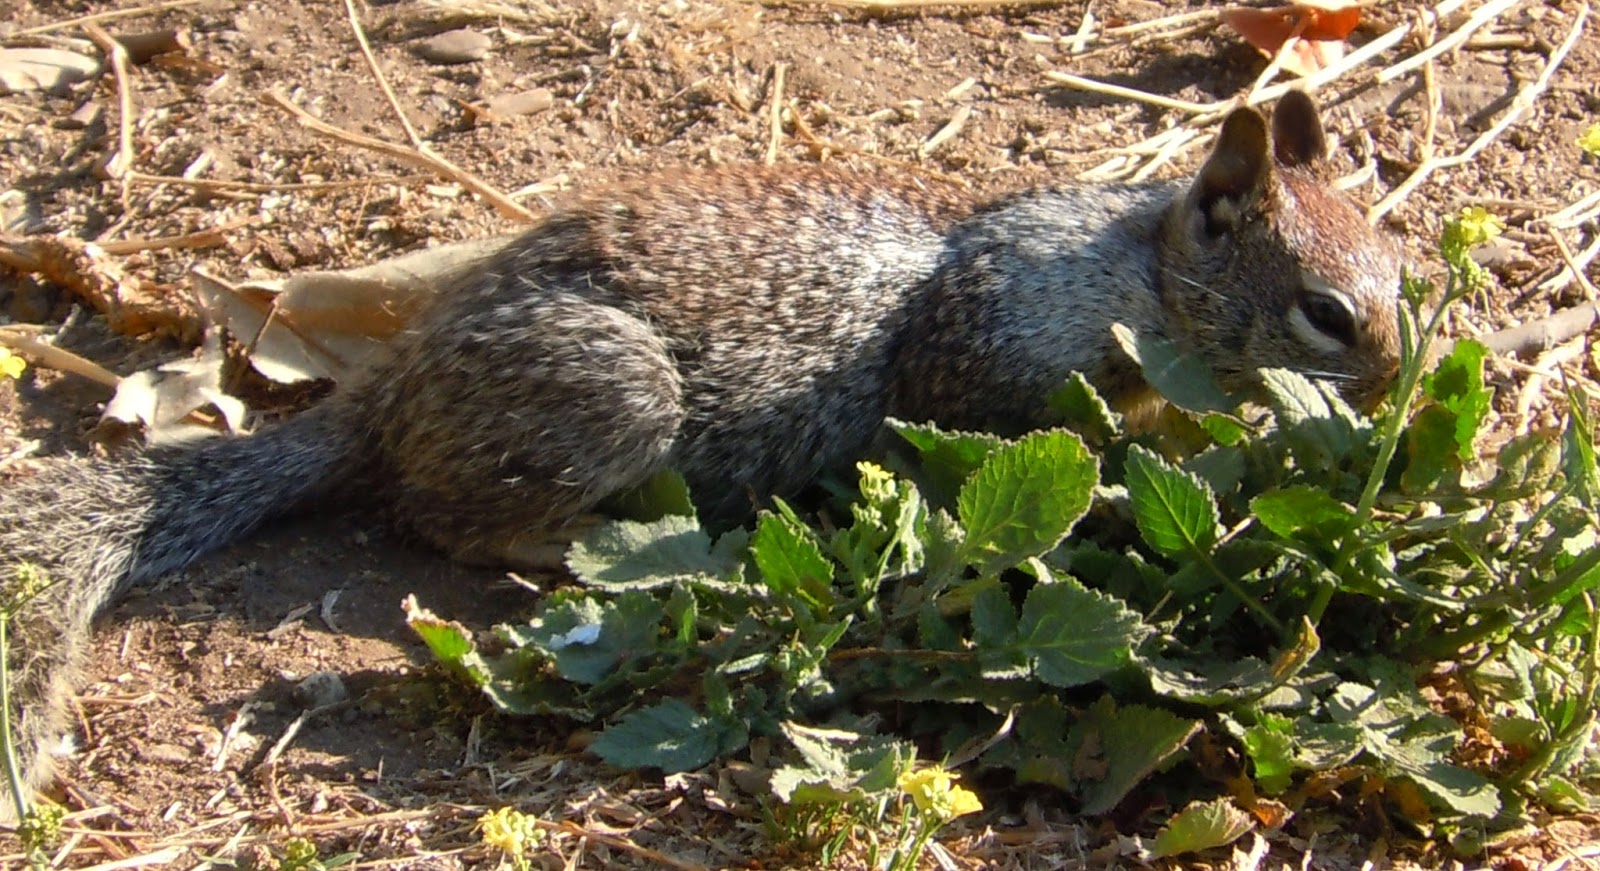 Got squirrels? You can get rid of them, if you're OK with rodenticide